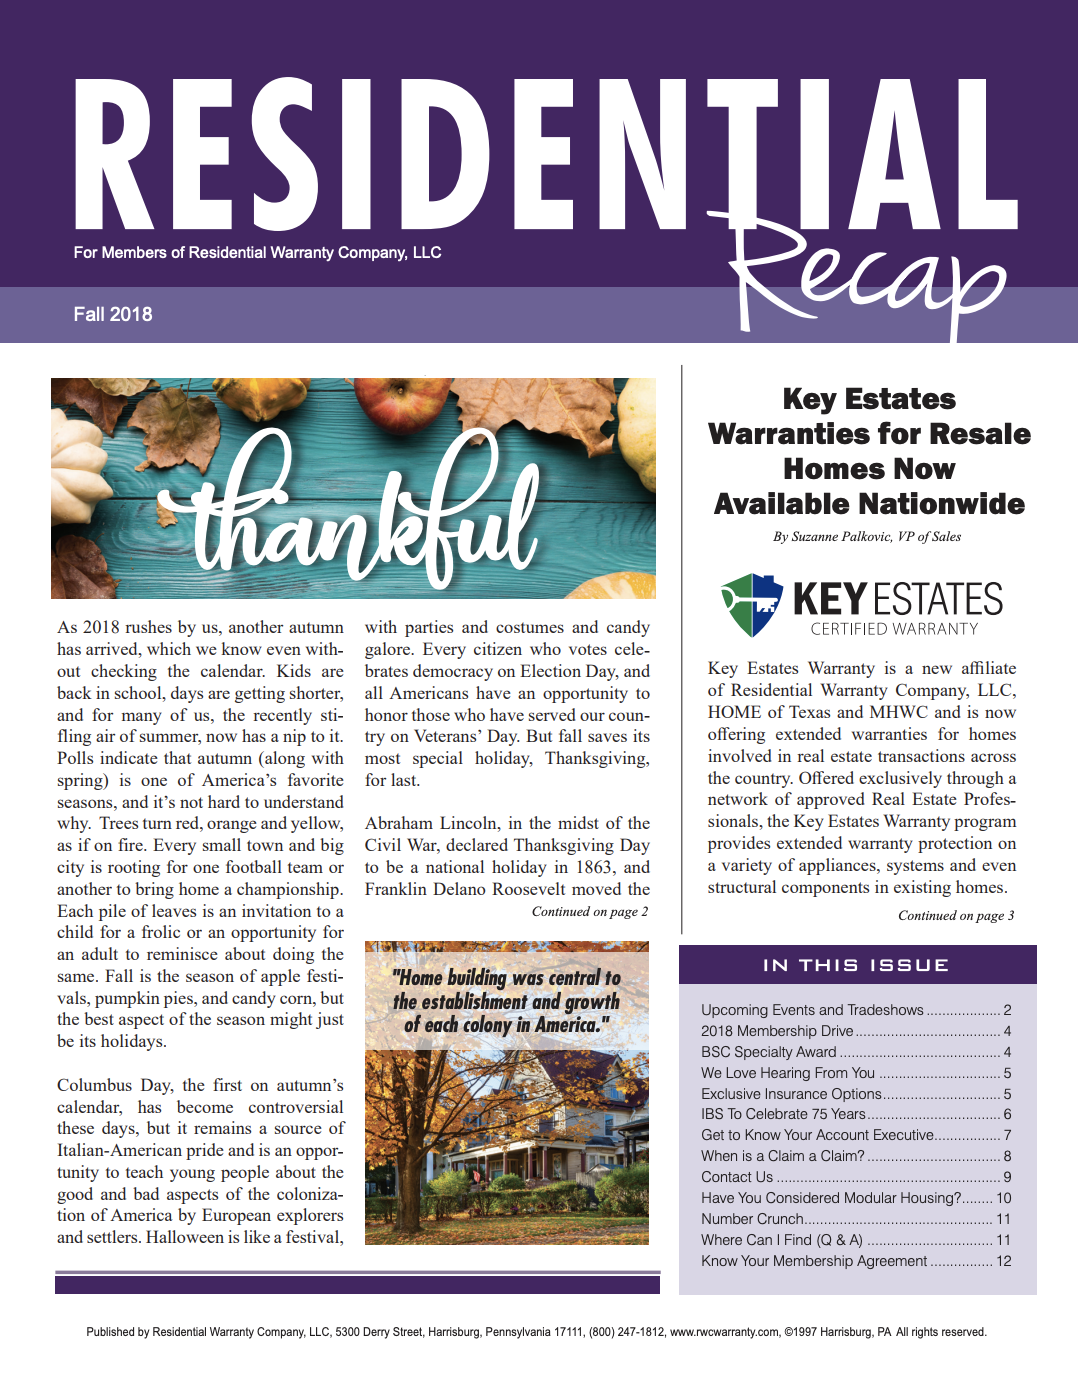 Residential Recap Newsletter about warranties and new home construction for builders and manufacturers